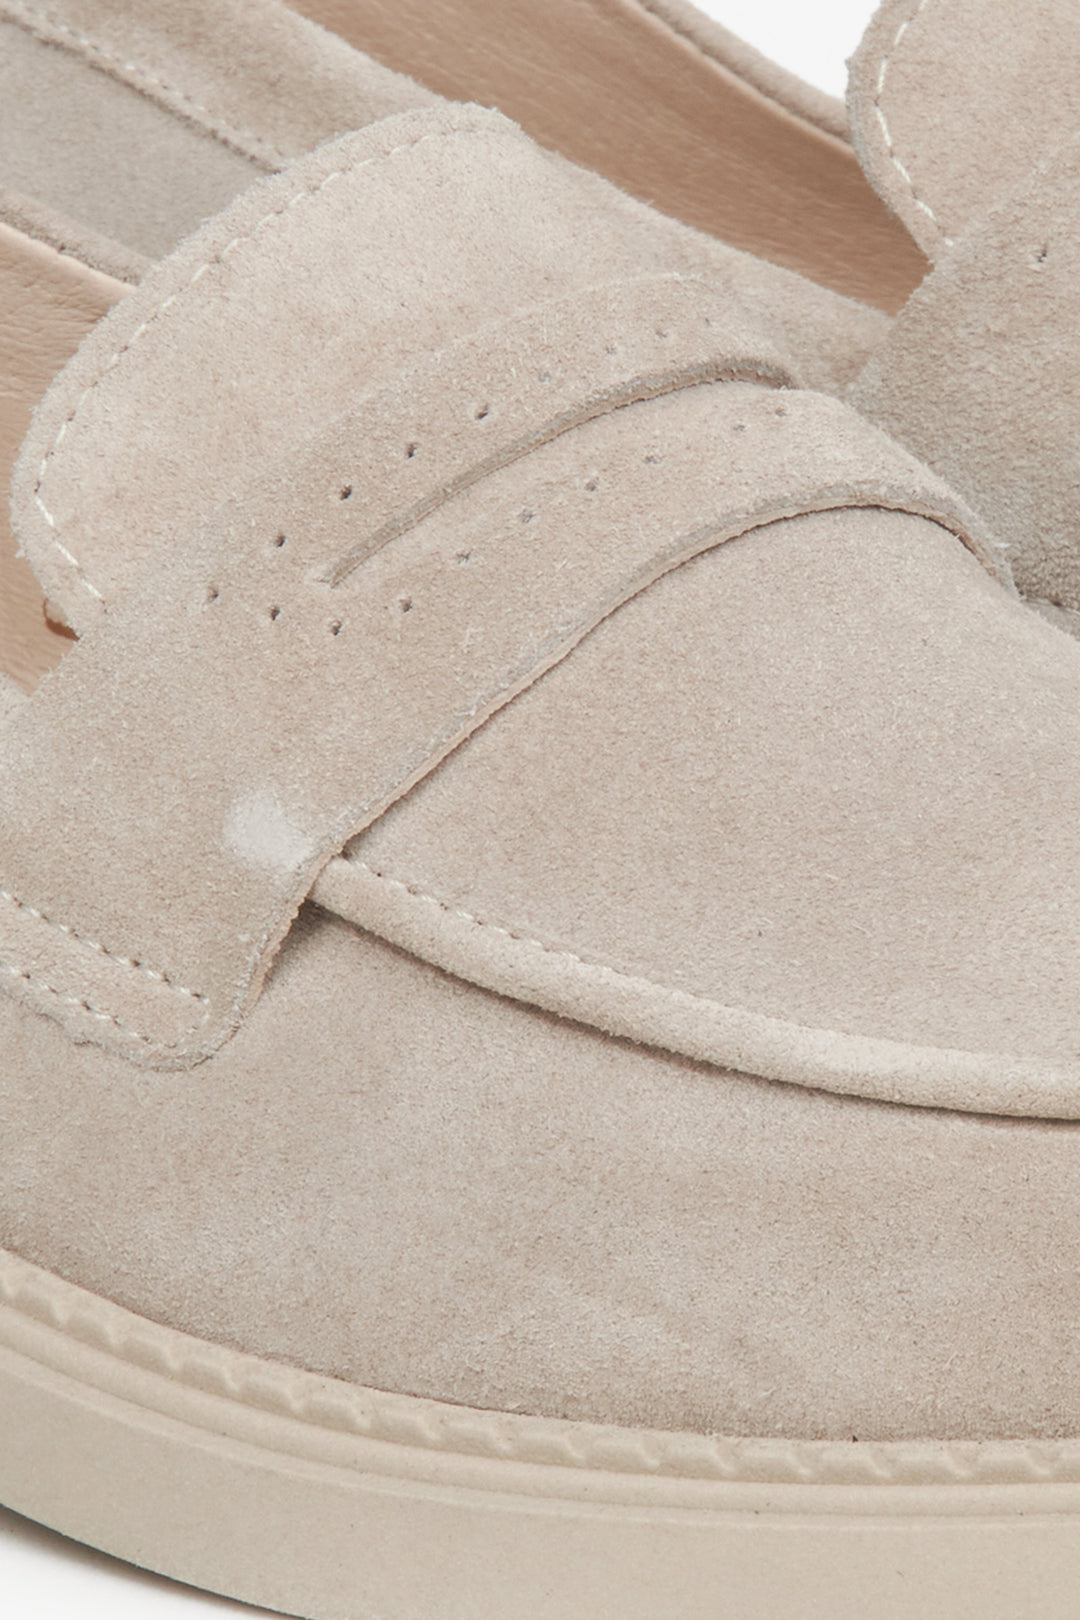 Women's velour loafers in beige colour by Estro - close-up on details.